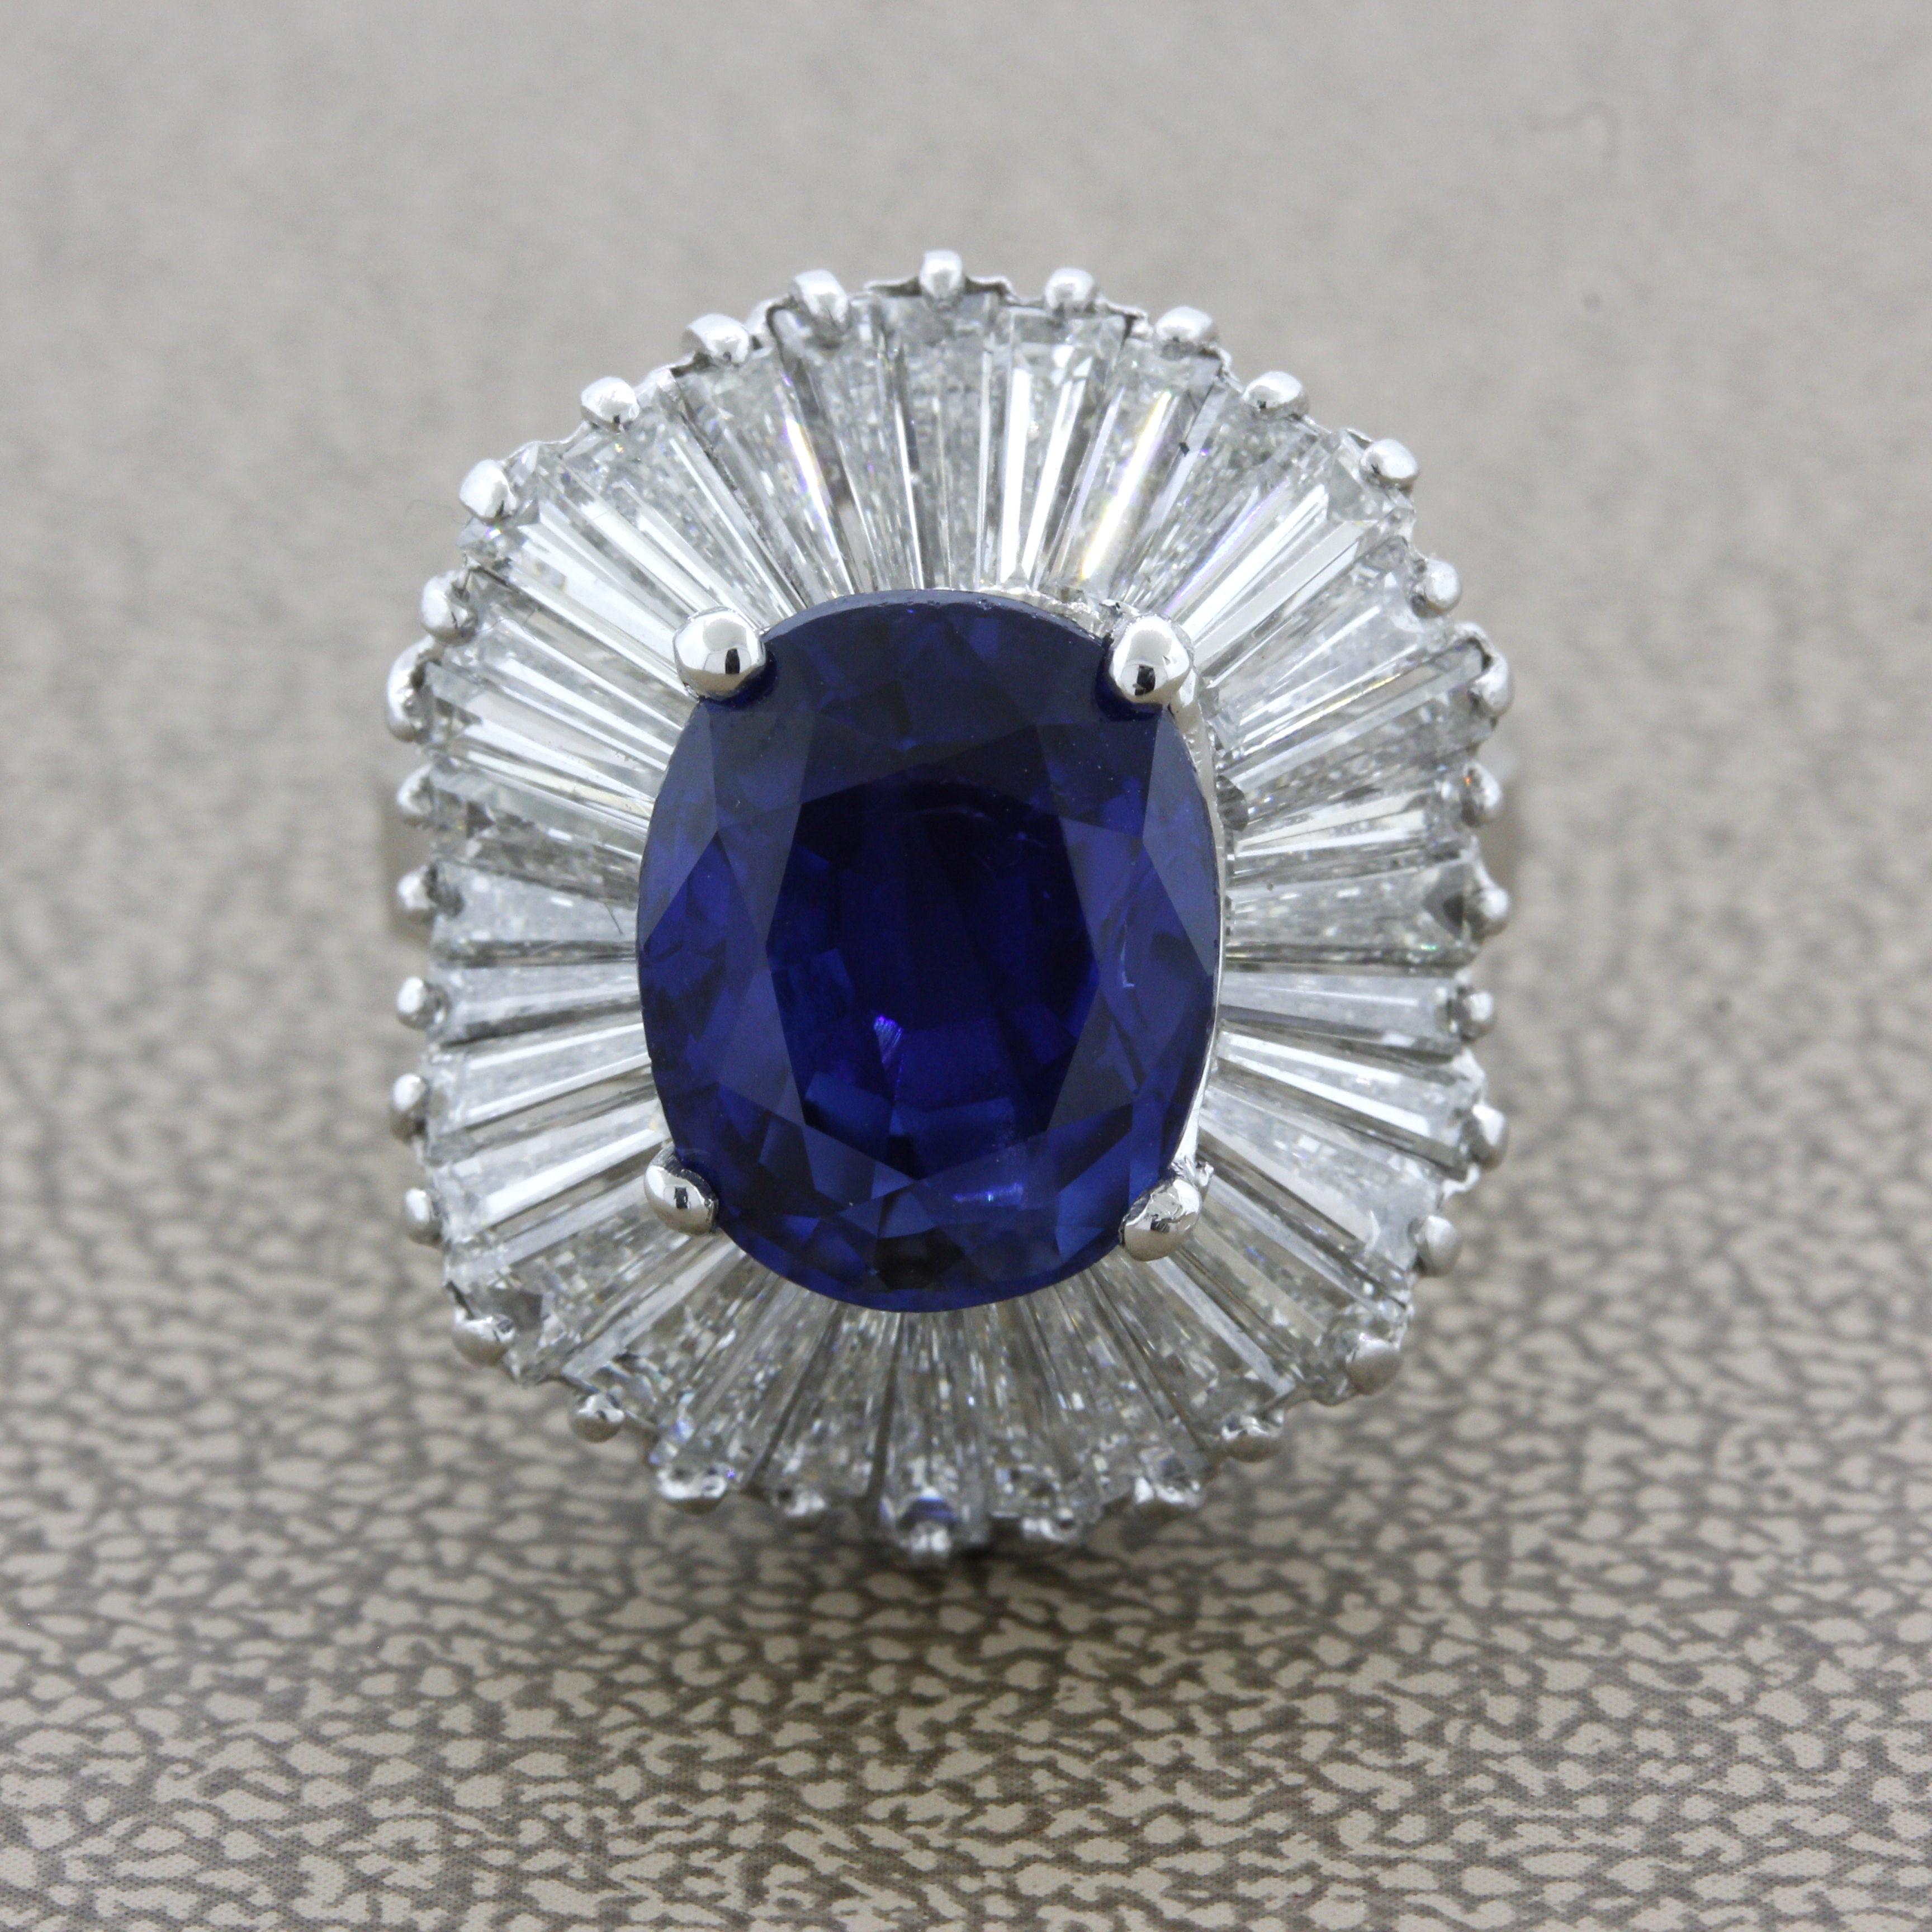 A rare treasure from the gem mines of Burma, known for producing the finest blue sapphires. This stone weighs an impressive 5.85 carats and has a rich, satiny blue color with a hint of purple making the color intense. Adding to that, the sapphire is